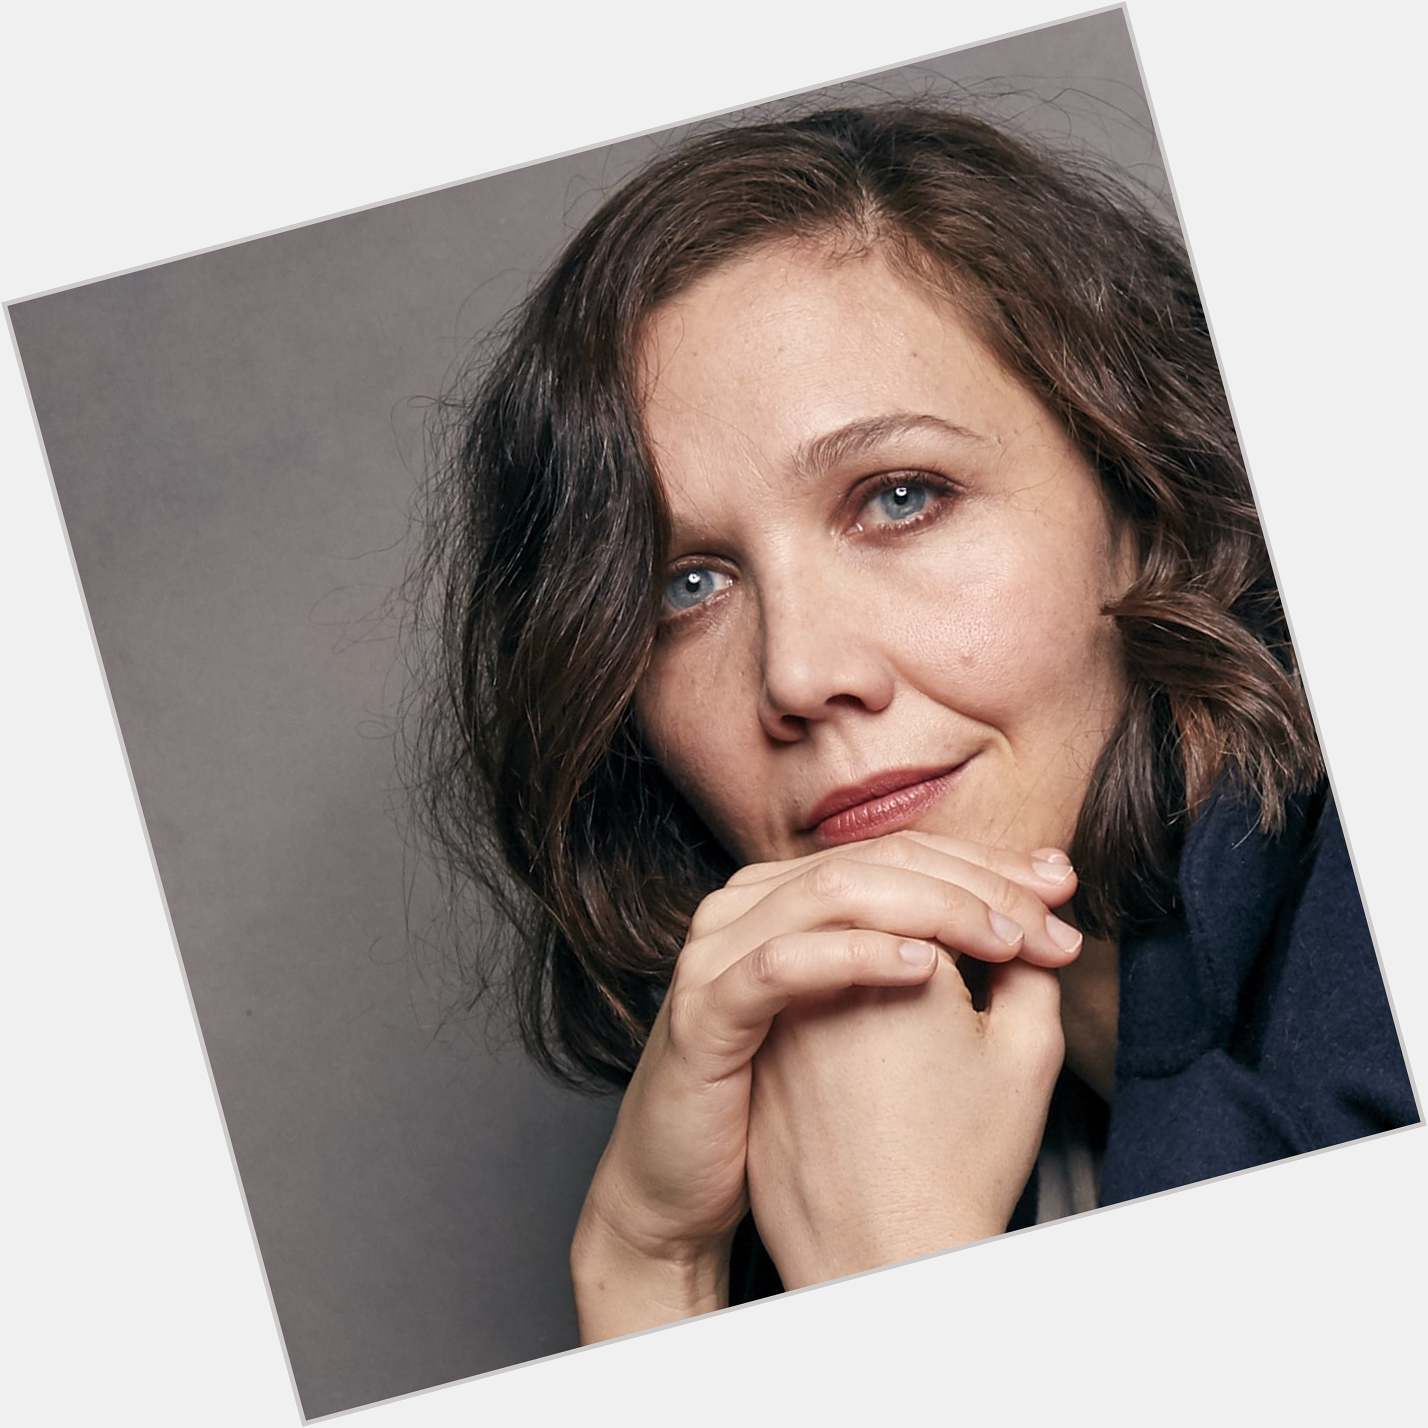 Happy Birthday to Maggie Gyllenhaal who turns 43 today! 